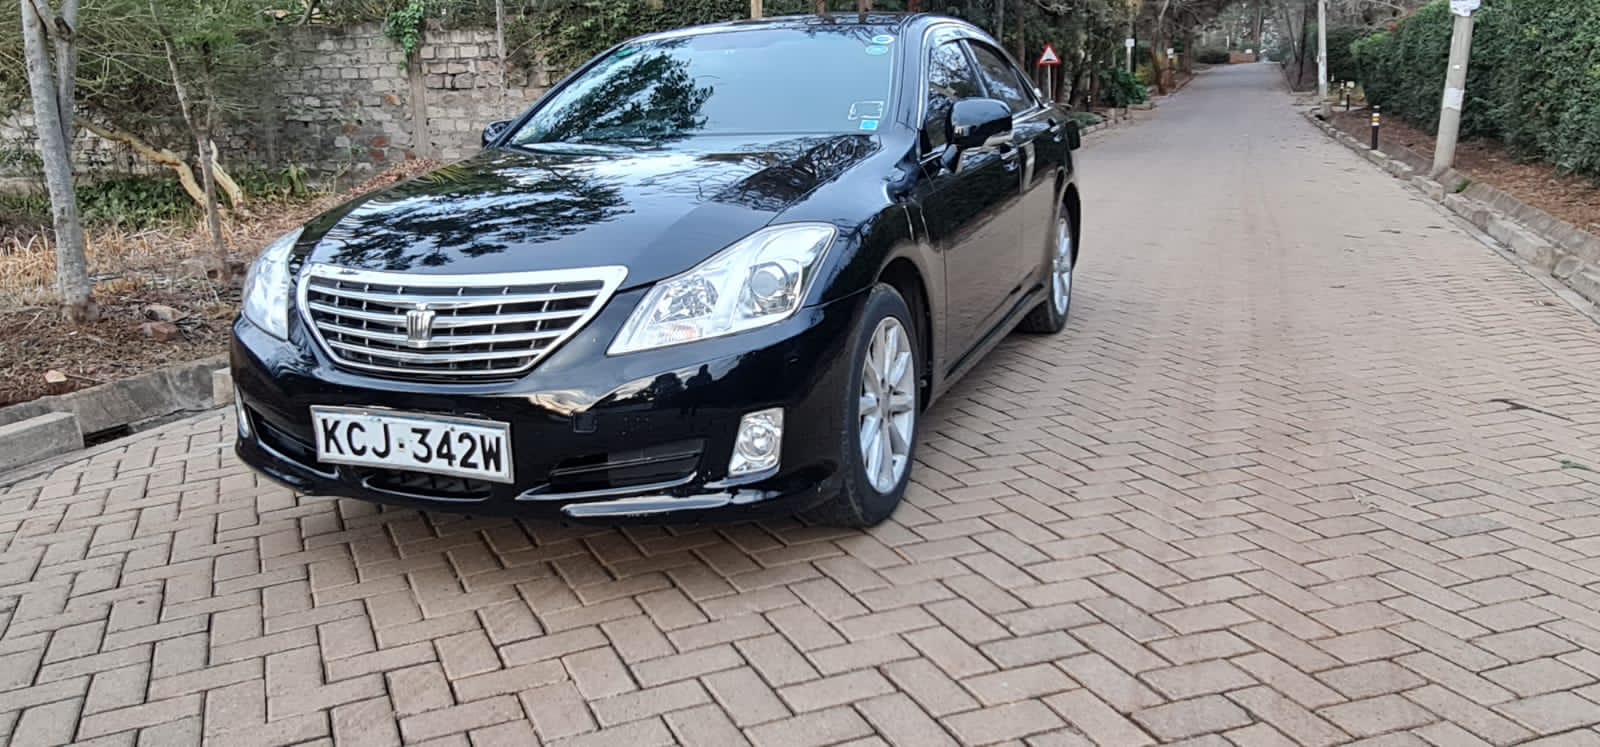 Toyota CROWN 2010 You pay Deposit Trade in Ok Hot Deal